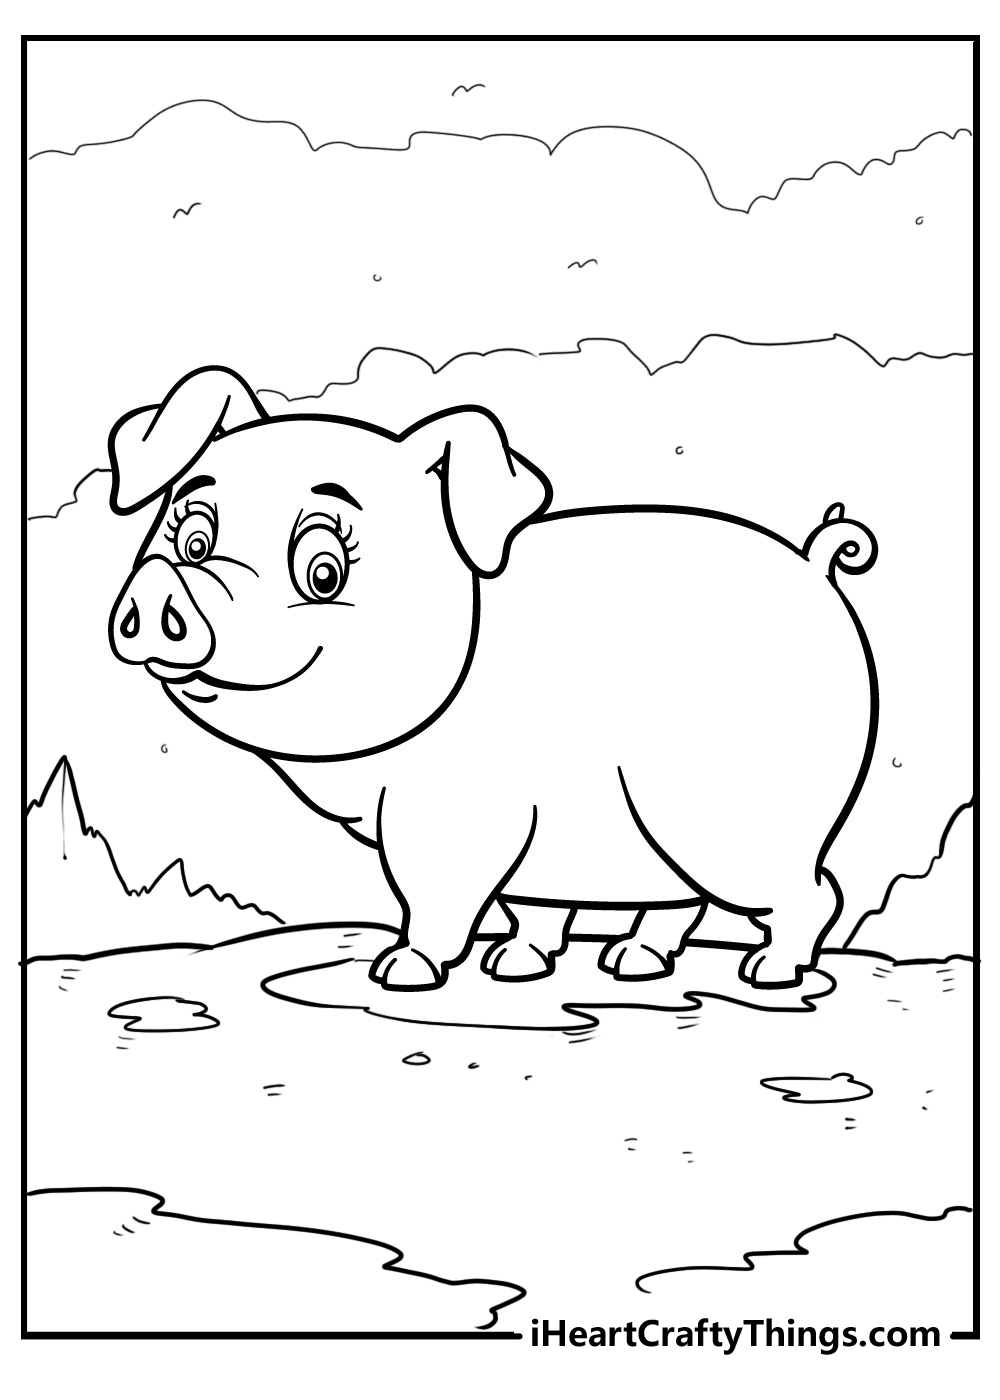 Pig coloring pages free printables